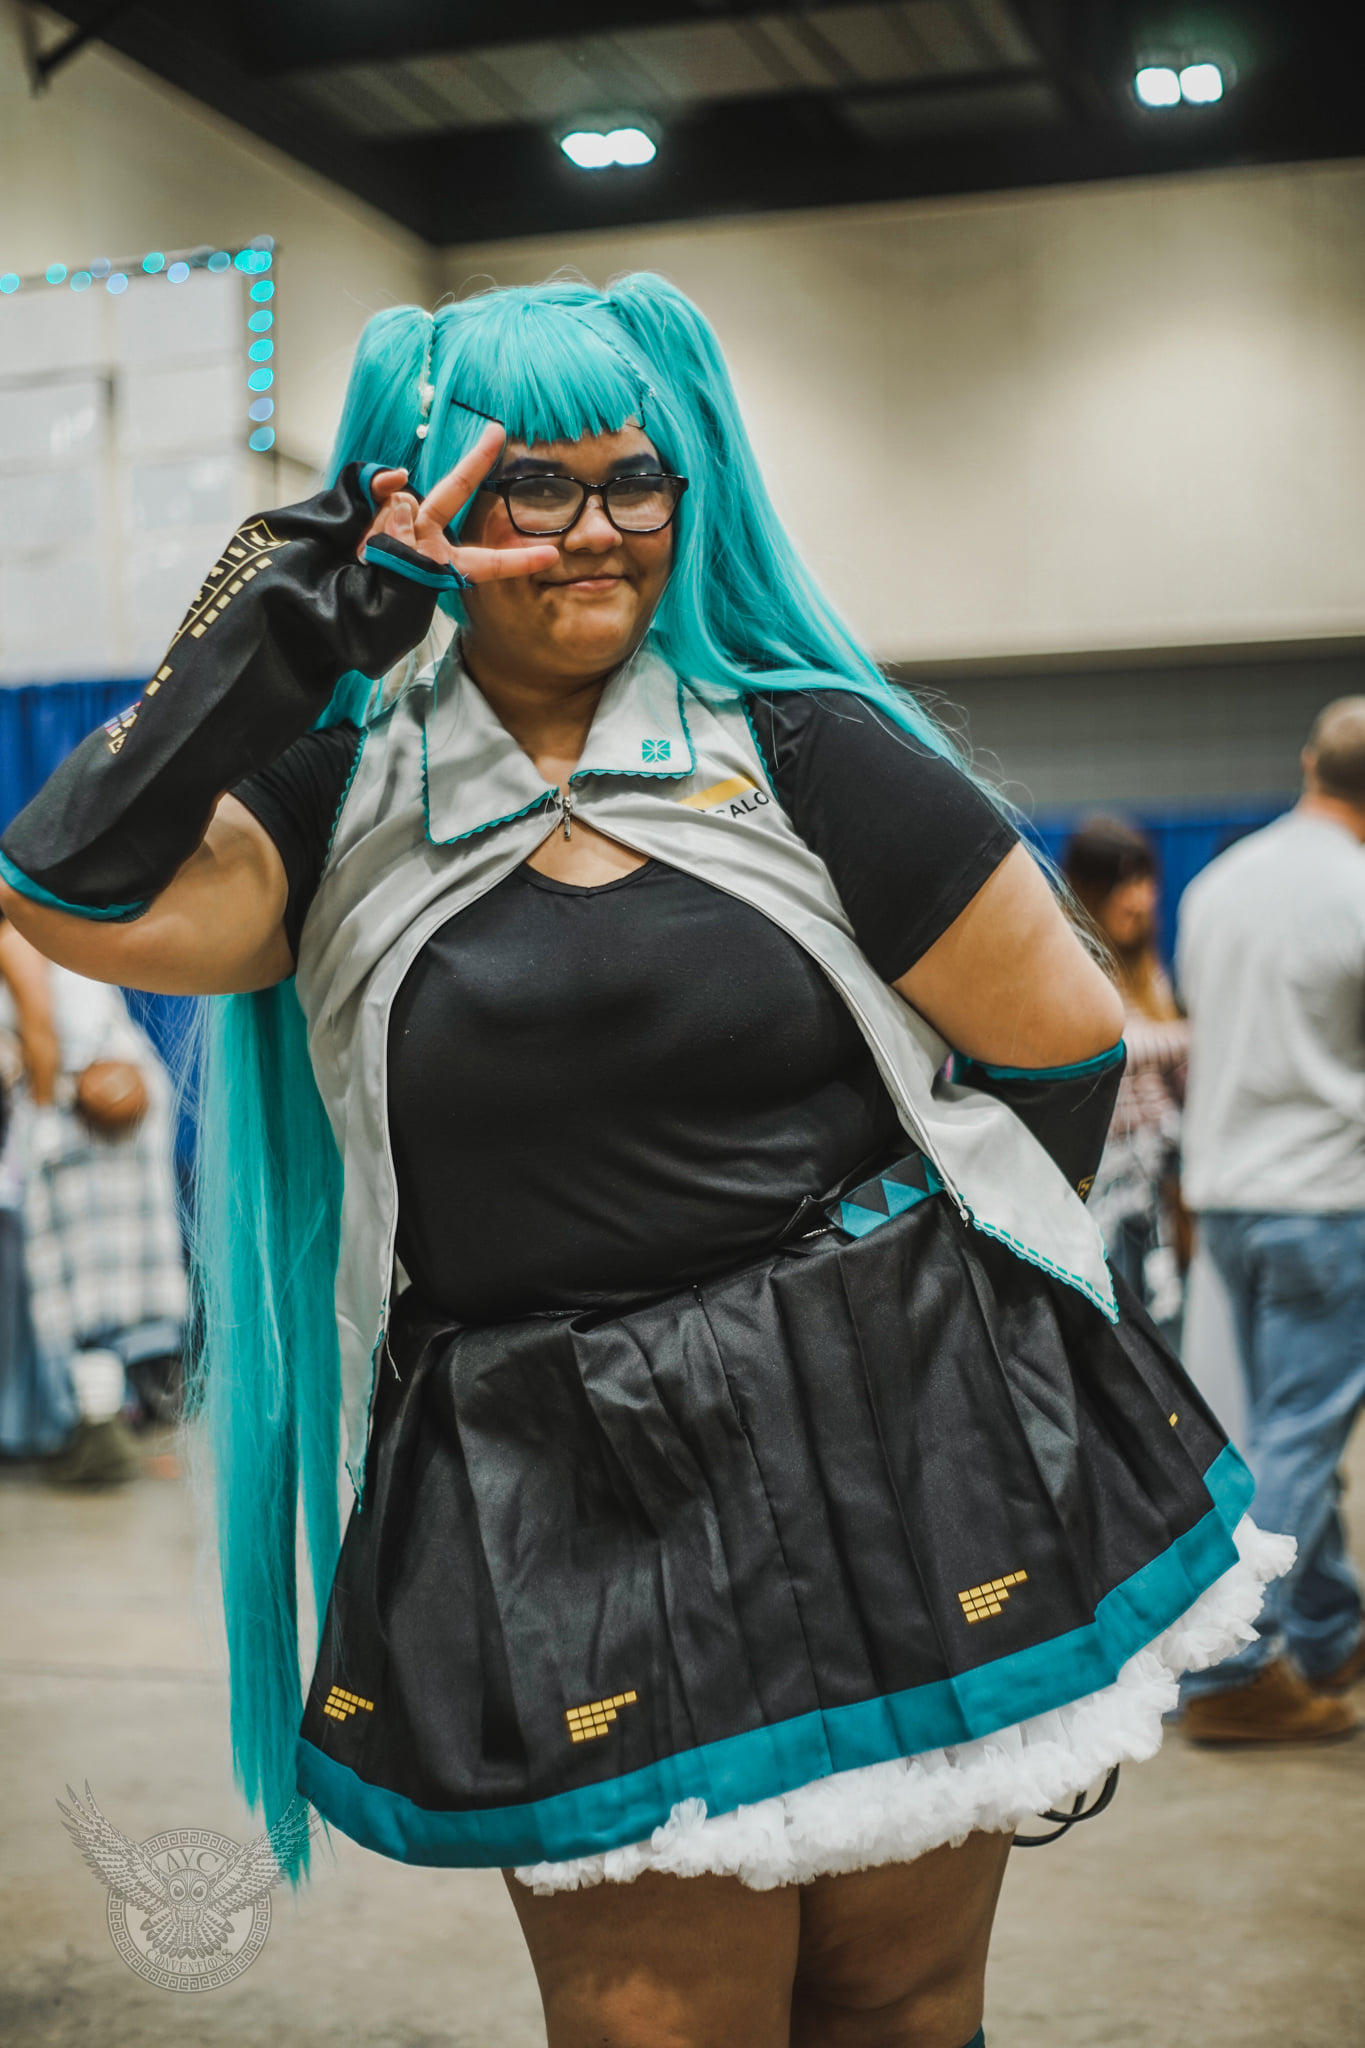 Memphis' Anime Blues Con weekend features cosplay, community building